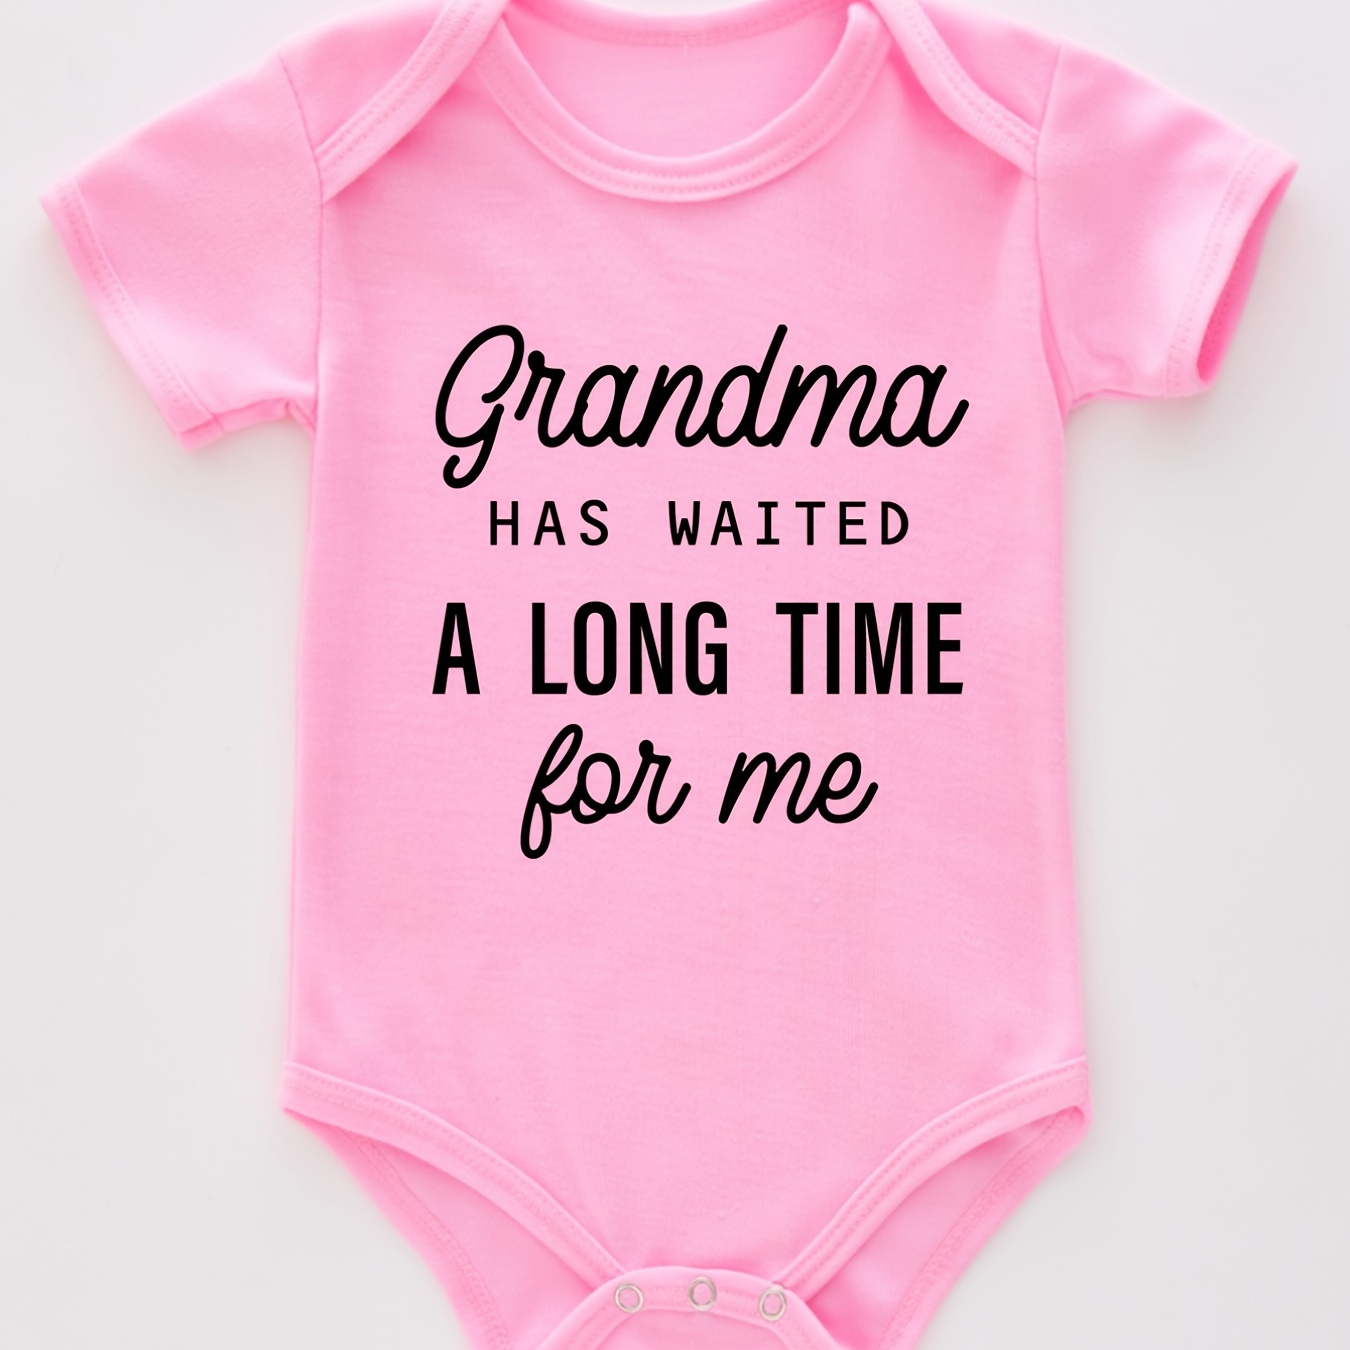 

Adorable Grandma-themed Bodysuit Onesies For Baby Girls - The Perfect Summer Outfit!